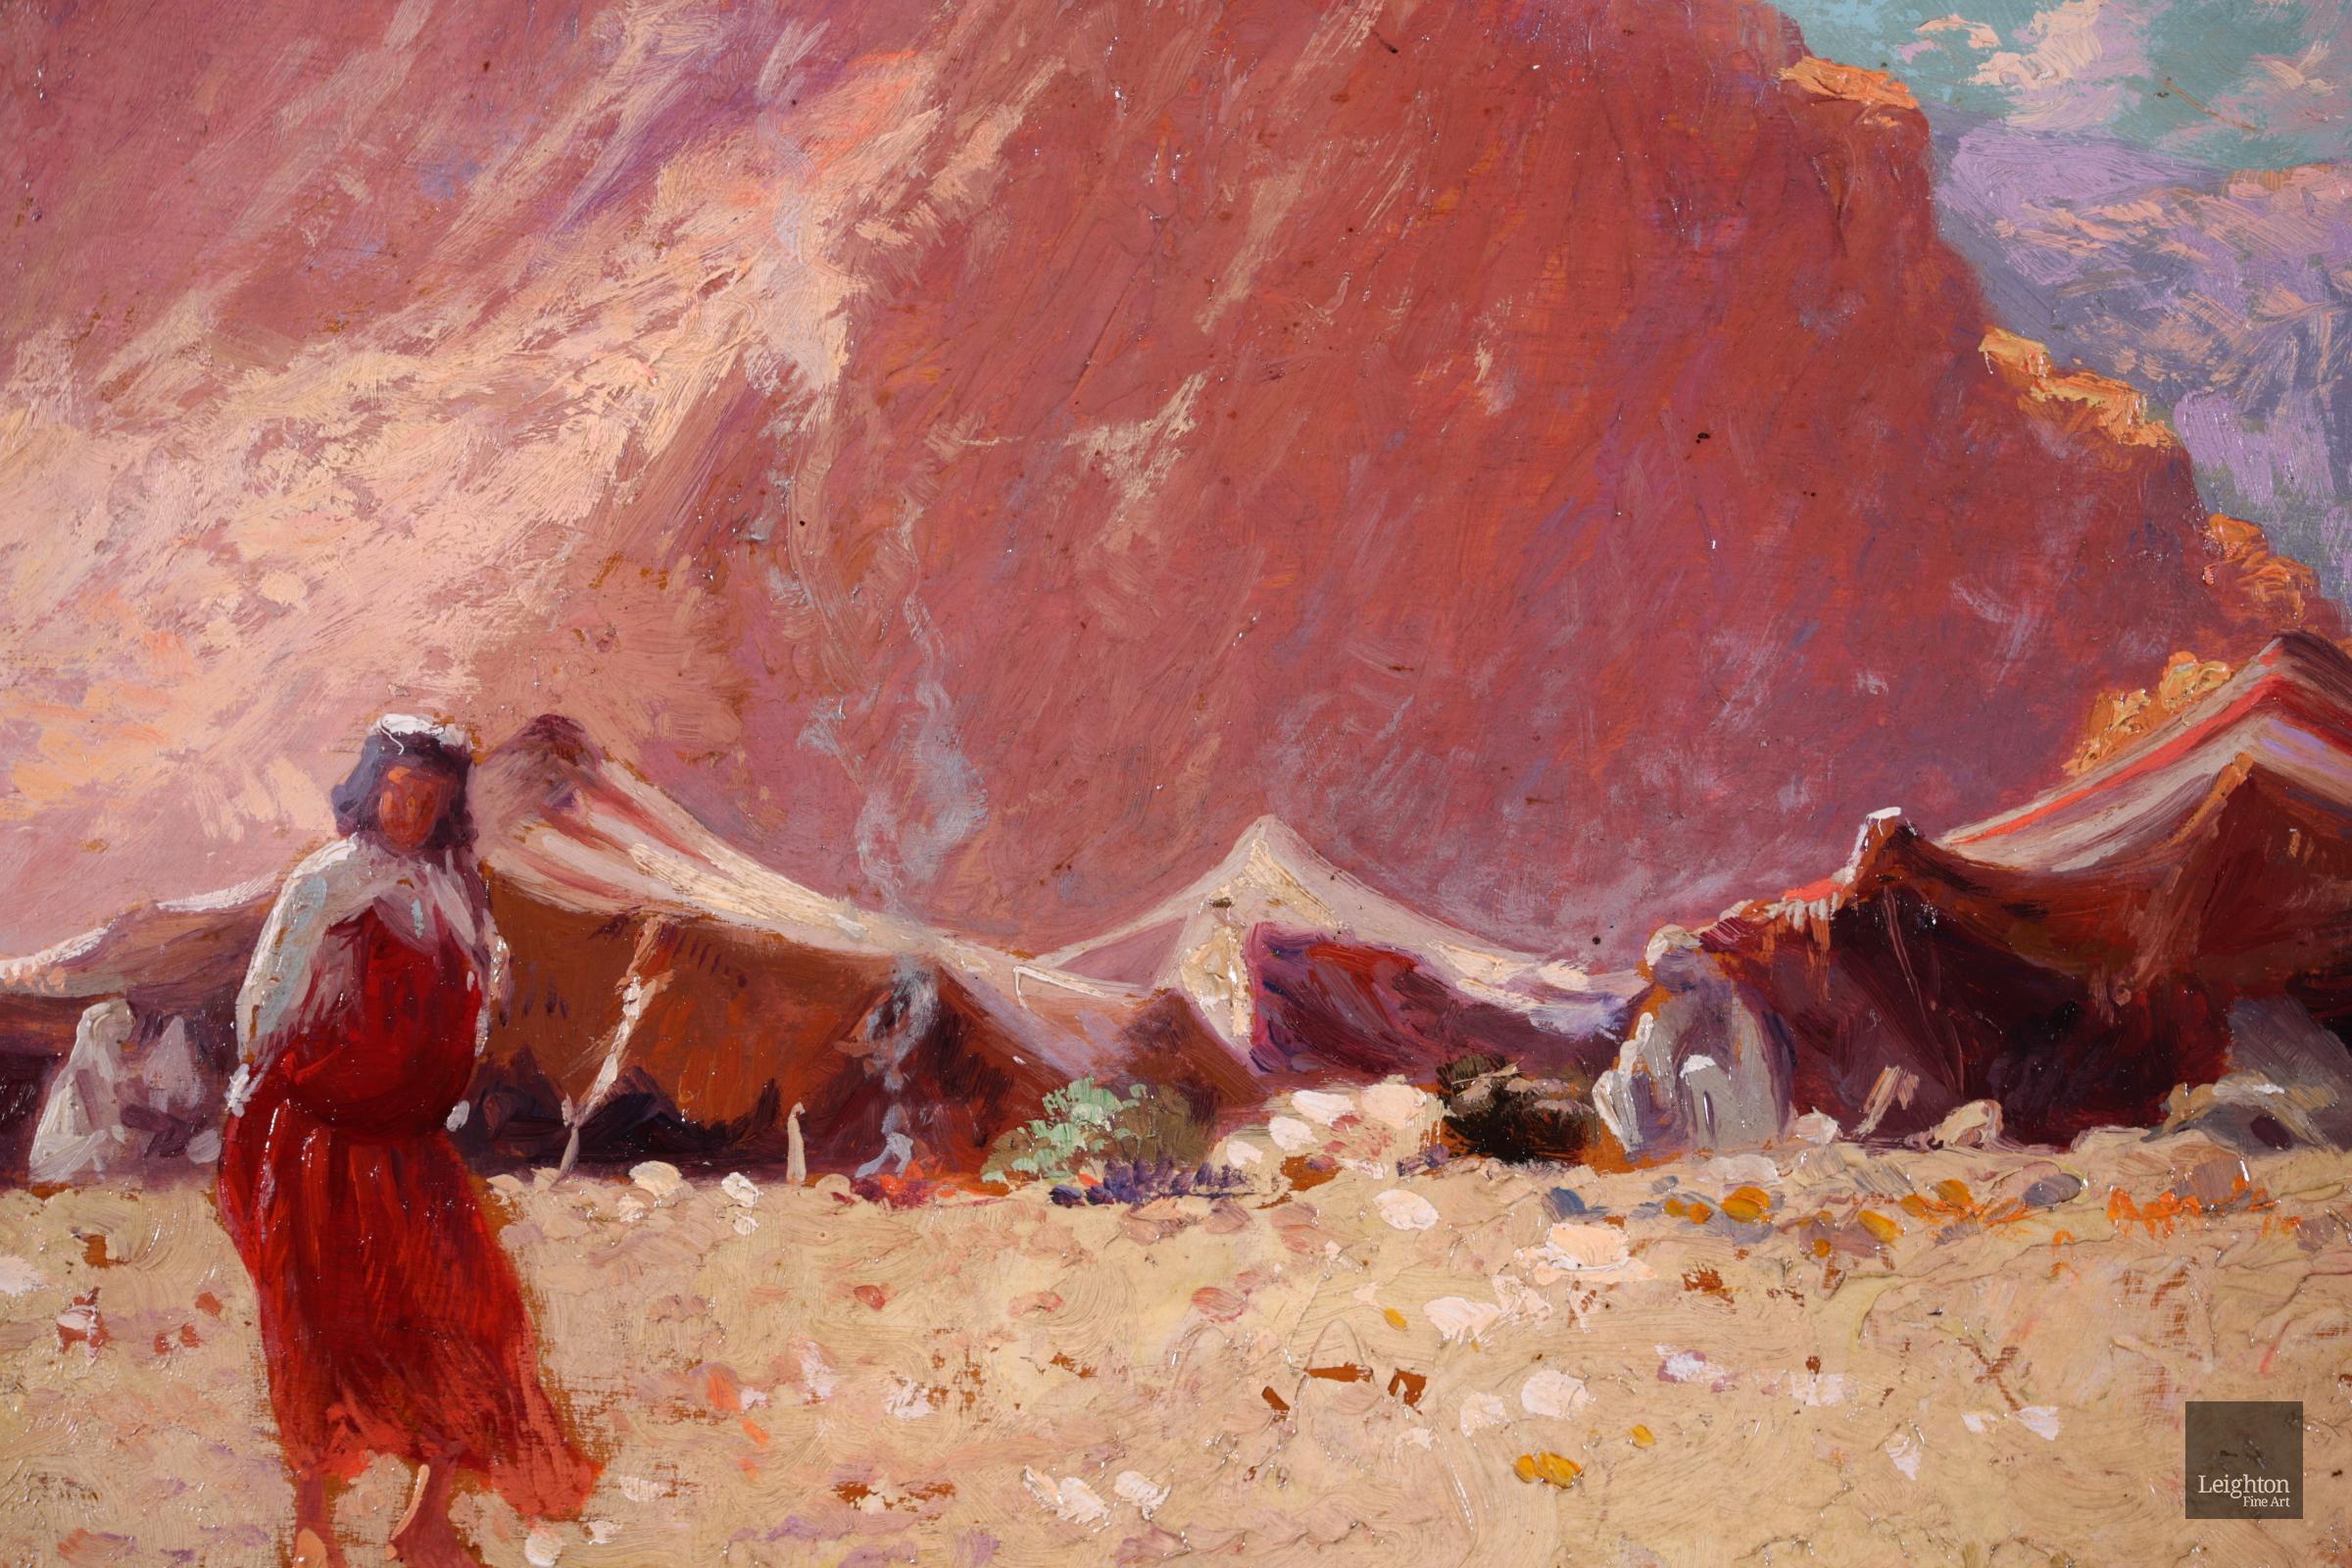 Signed and dated orientalist figurative landscape oil by French painter Alexis Auguste Delahogue. The work depicts the camp of Bedouin - a nomadic Arb tribe - in an arid desert of Algeria. Many figures can be seen crouching under tents and in the